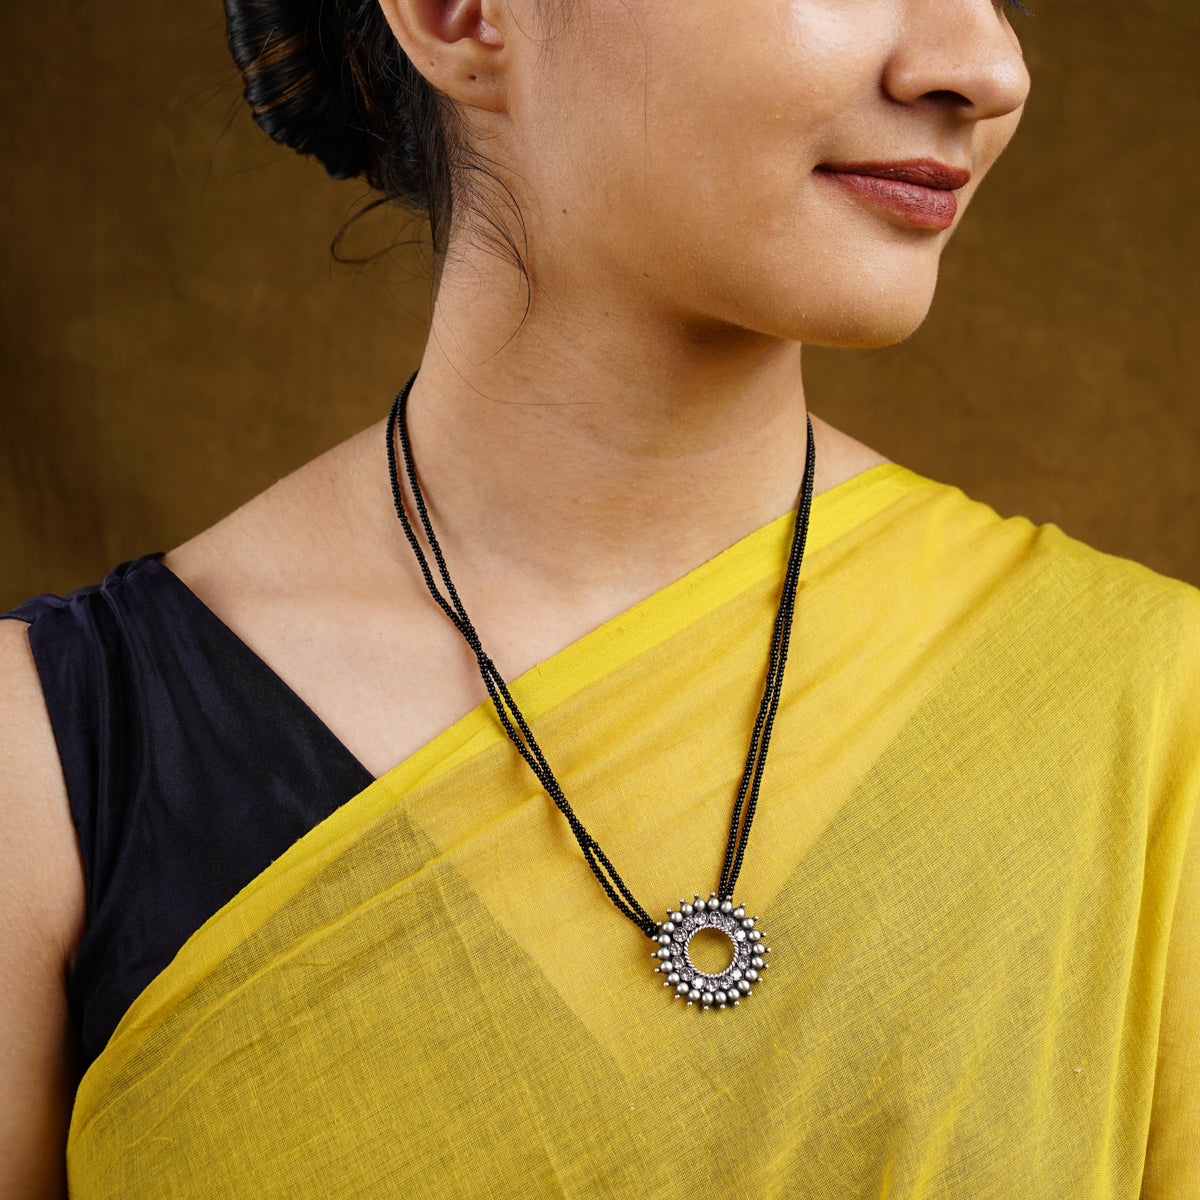 a woman wearing a yellow shirt and a necklace